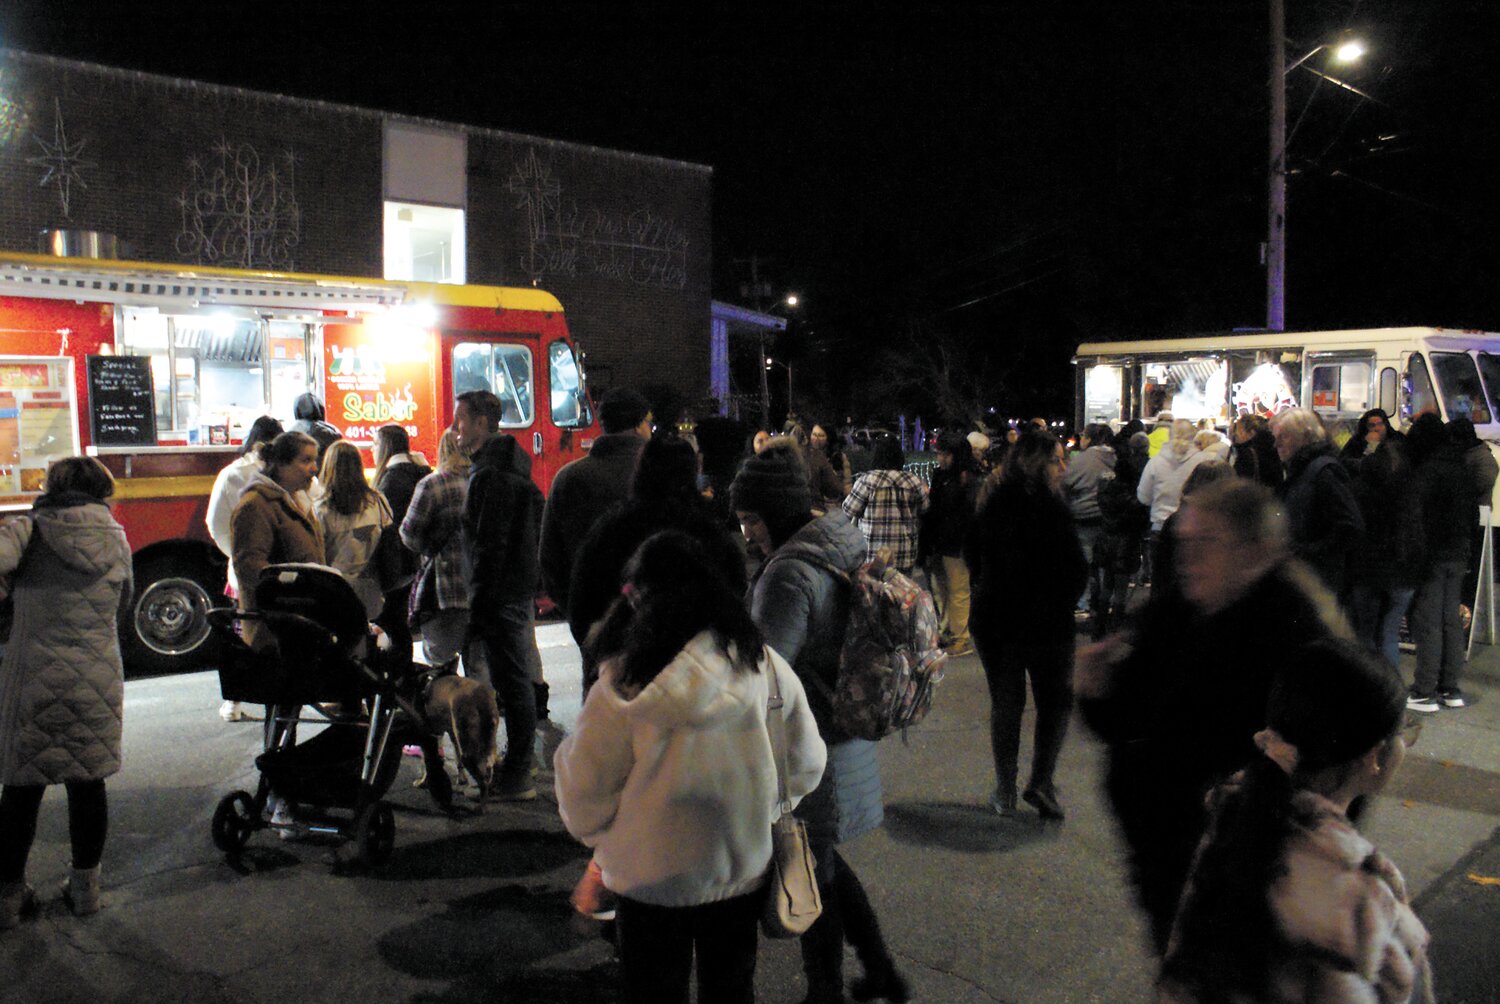 FEAST YOUR EYES: Five local food trucks were invited to cater the lighting. Visitors take a break to grab dinner. (Photo by Steve Popiel)